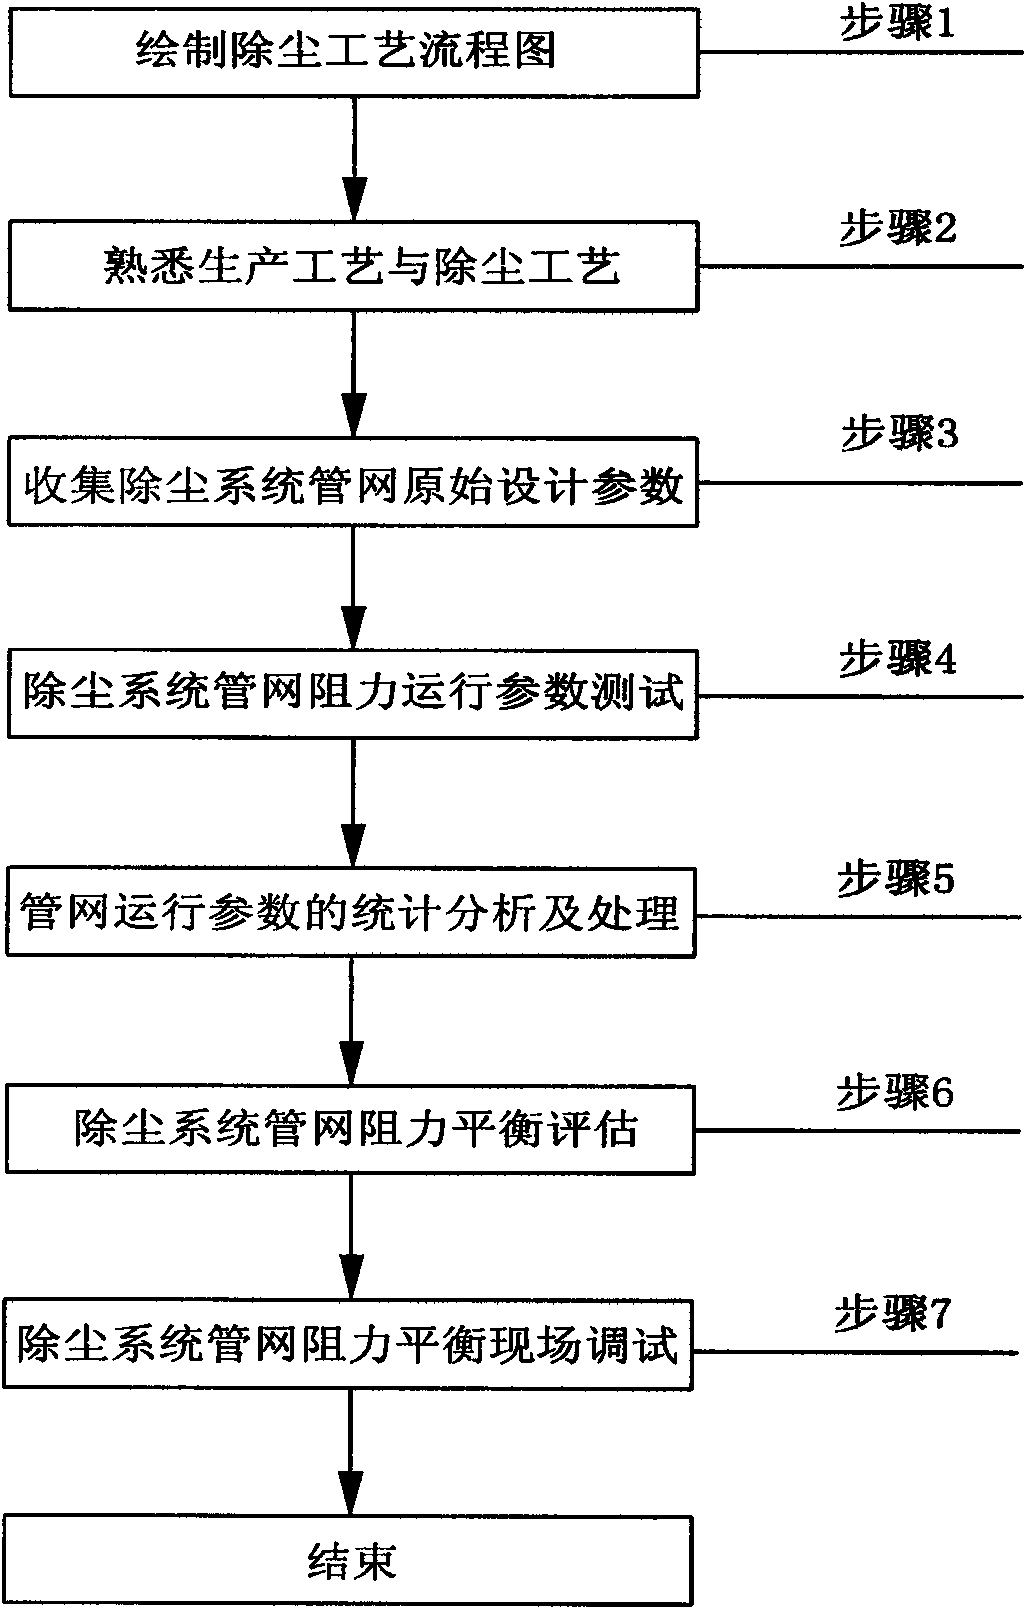 Dust removing system pipe network resistance balance evaluation and debugging method